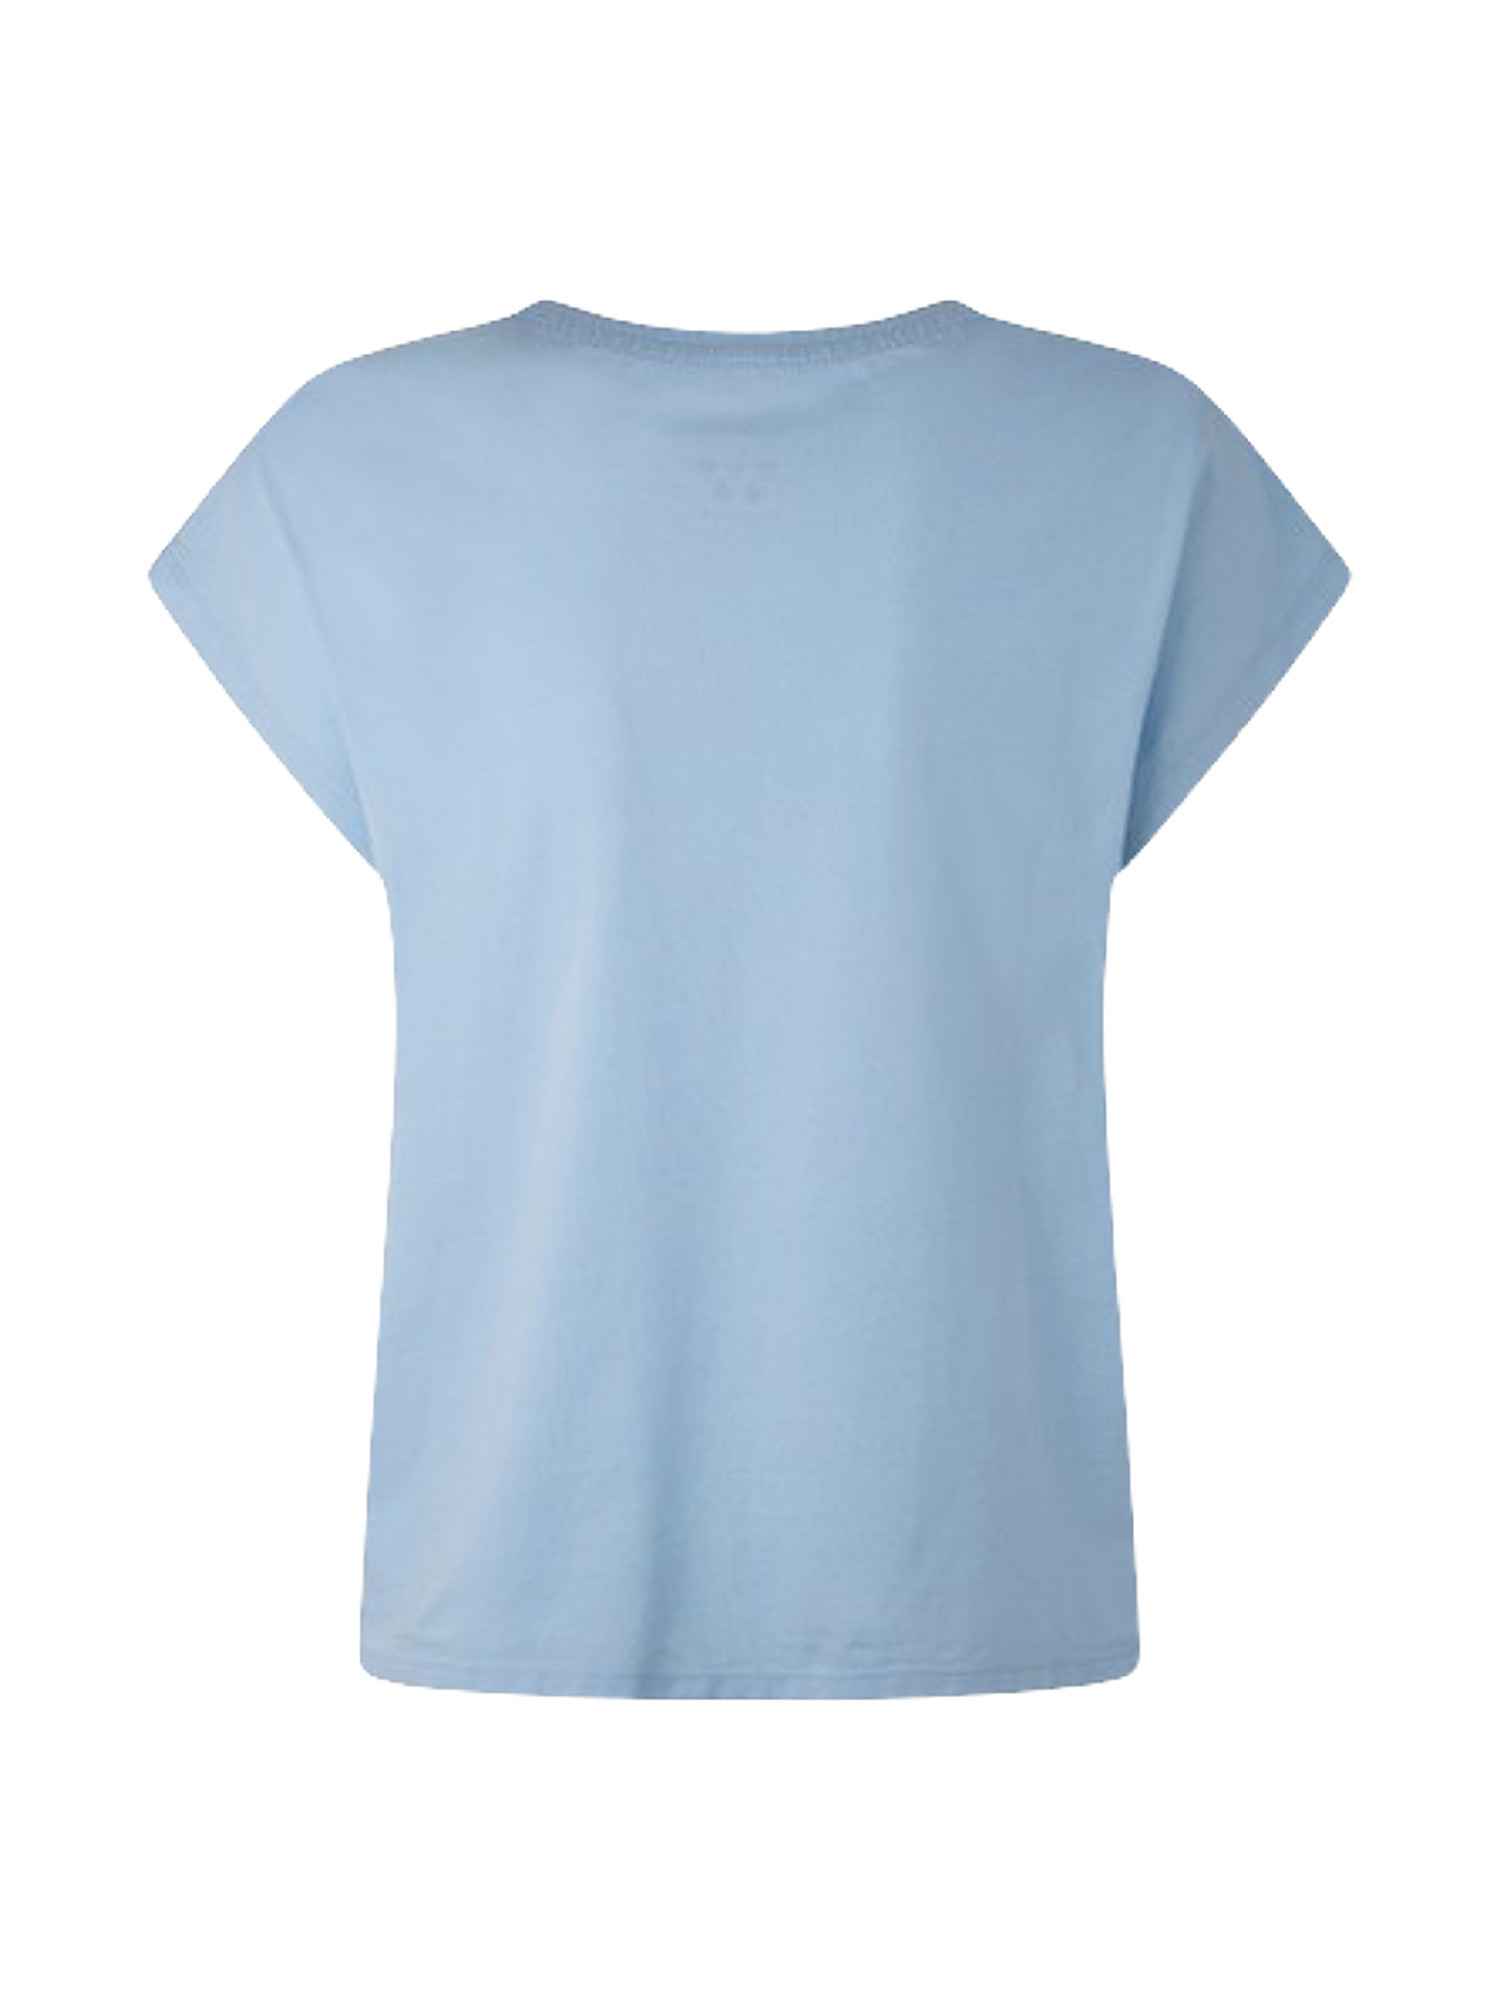 Rosie worn out text print t-shirt, Light Blue, large image number 1